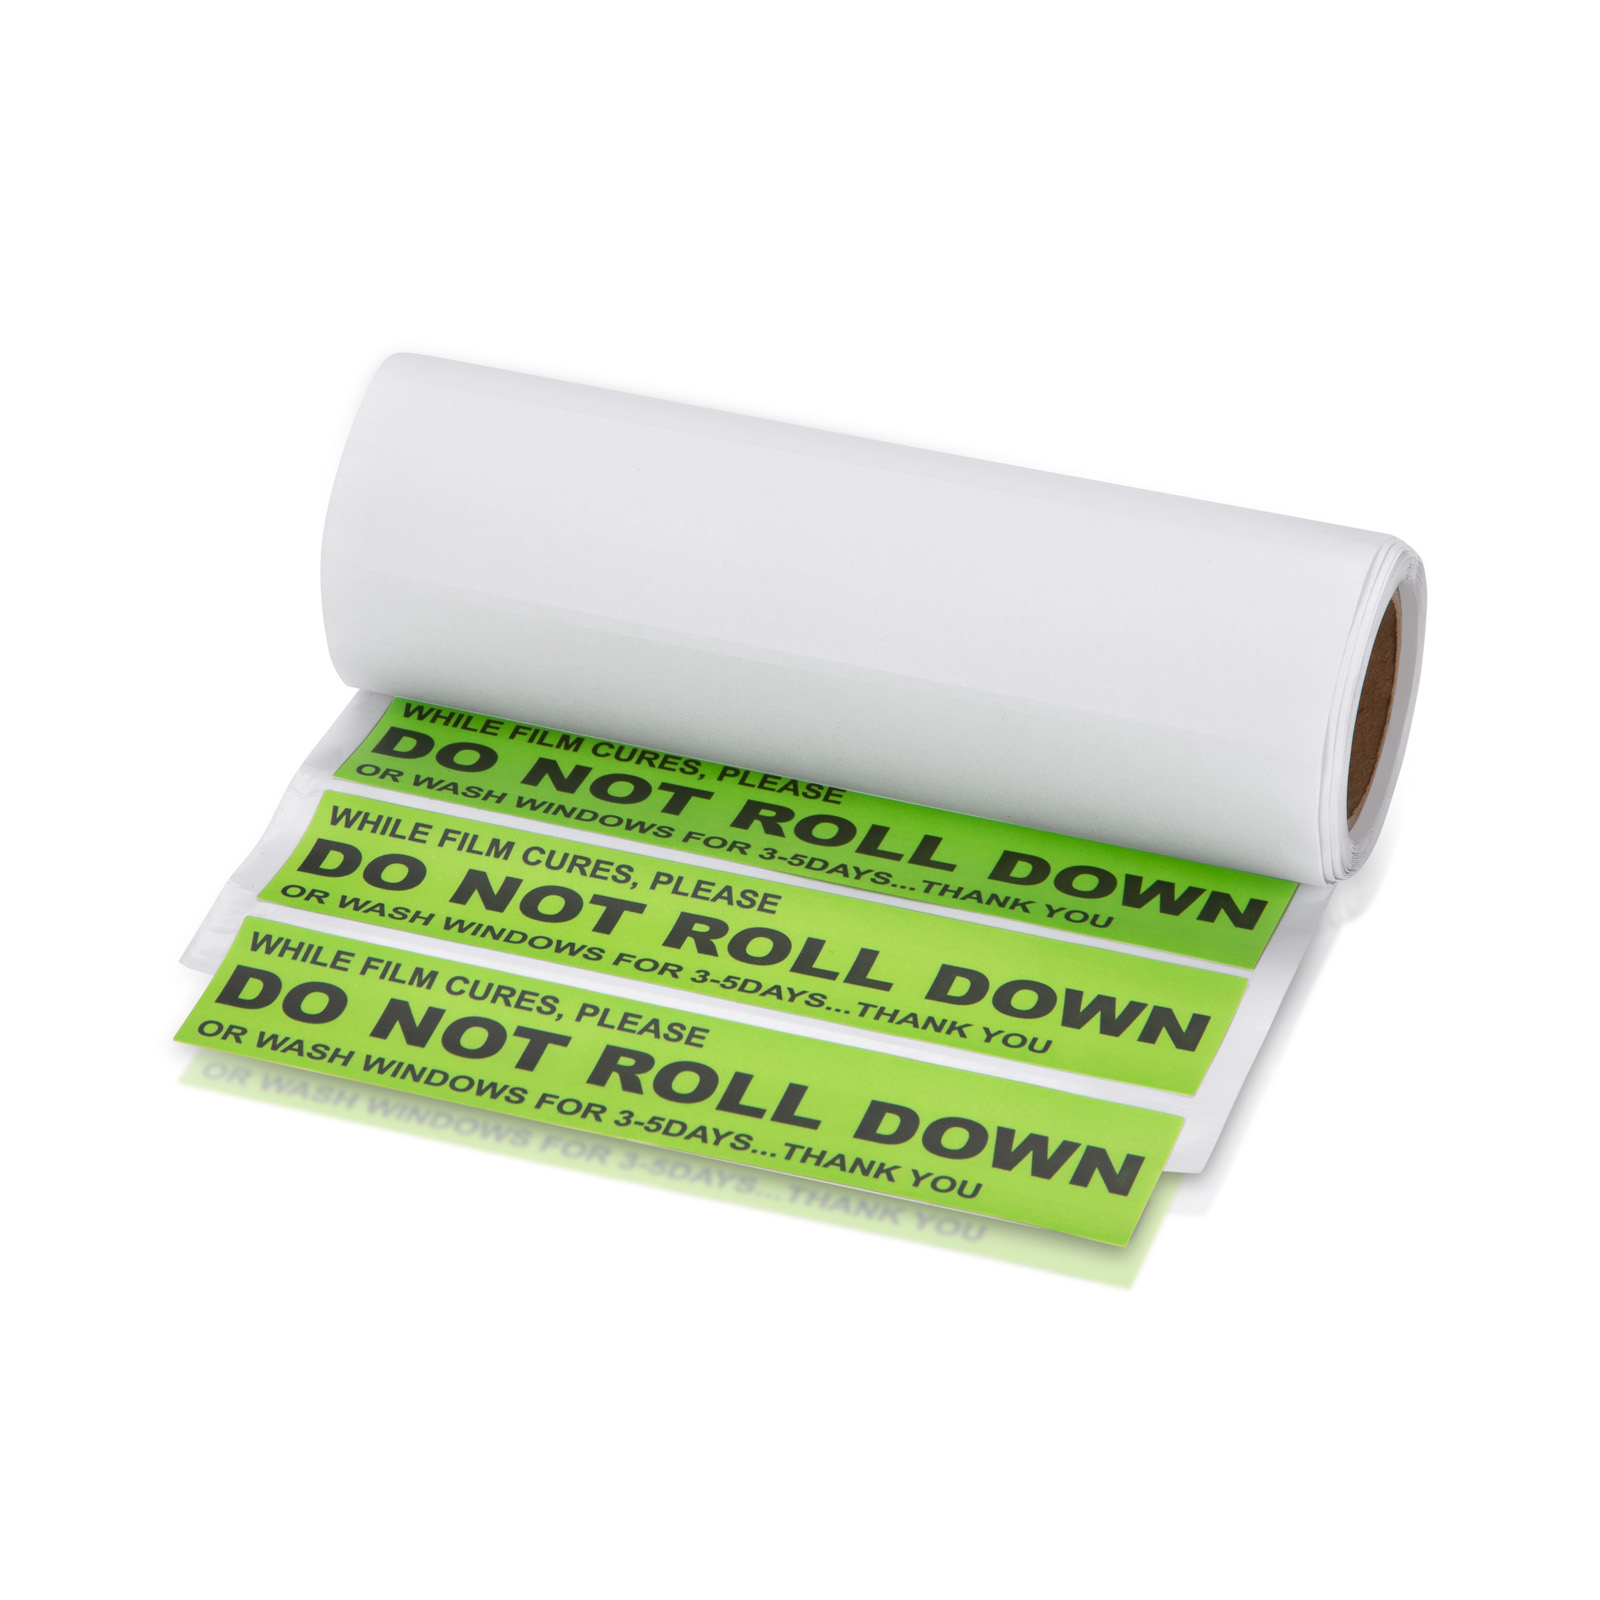 Green ''DO NOT ROLL DOWN'' Sticker for Window Switches